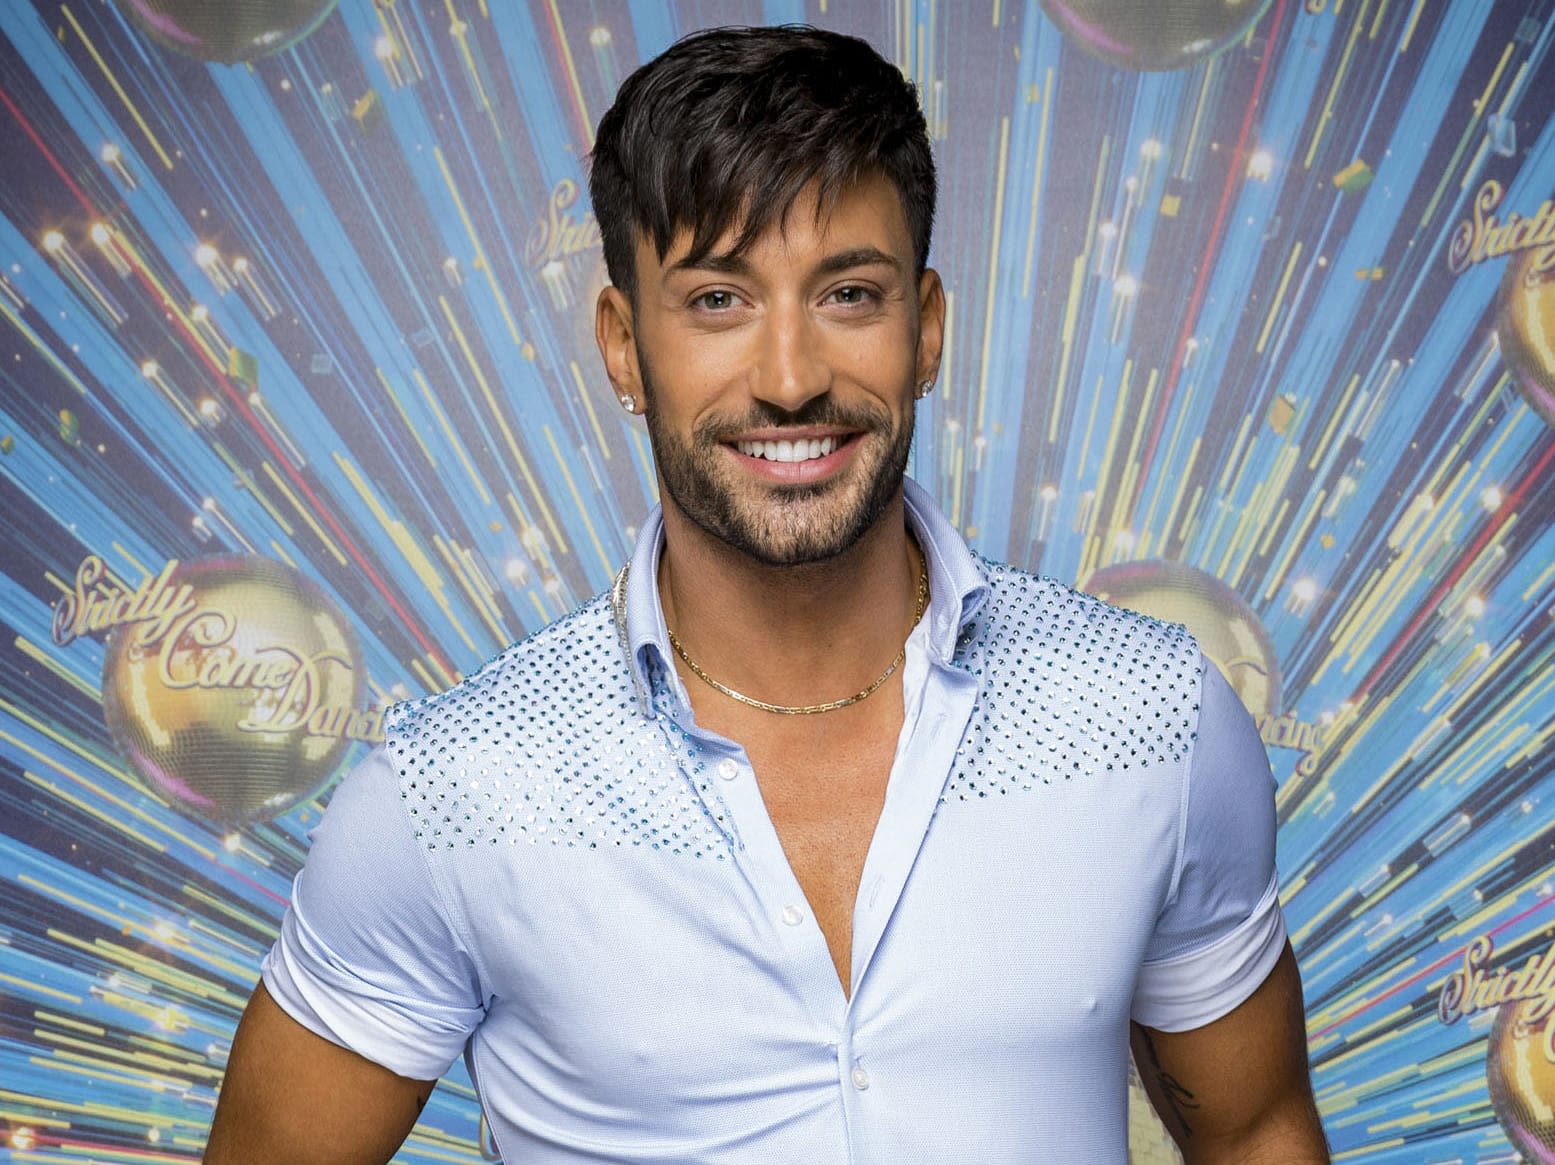 What we know about the Strictly Giovanni Pernice drama